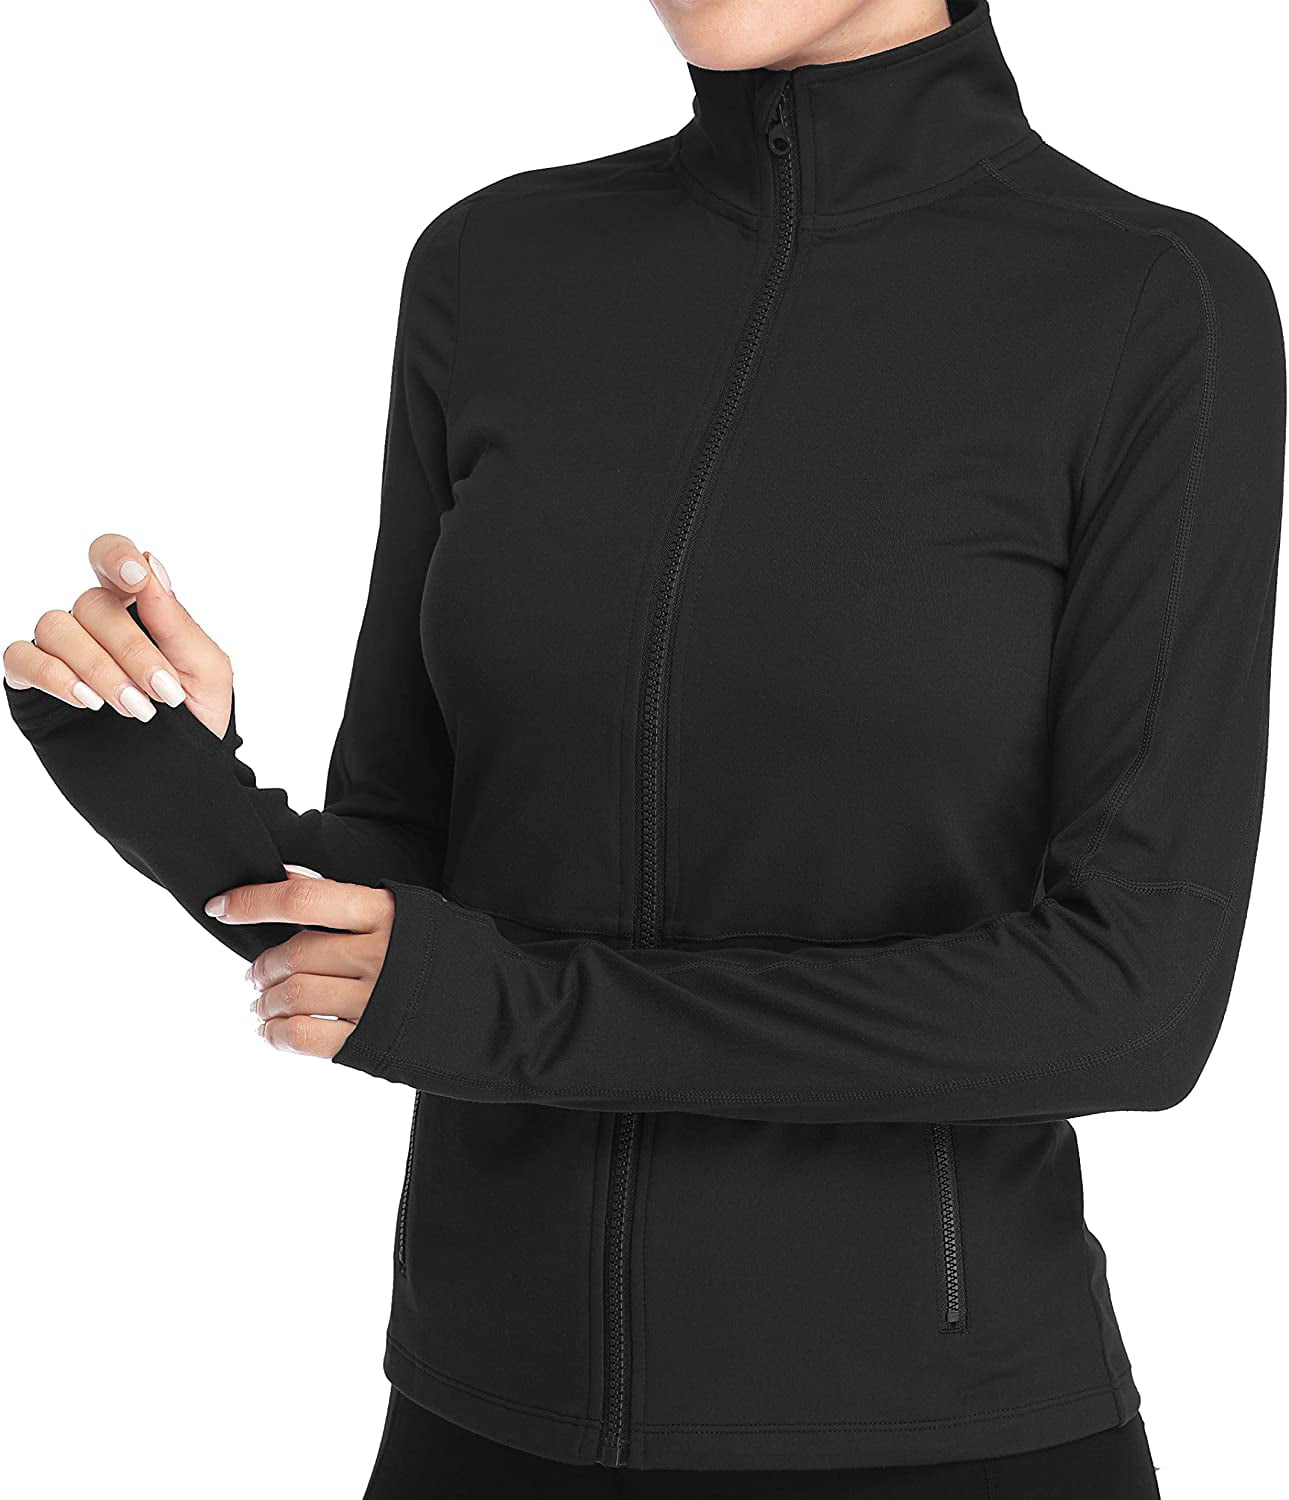 DISHANG Women's Dry-fit Running Jacket Comfy Full Zip Stretchy Yoga Workout Track Jacket with Thumb Holes 